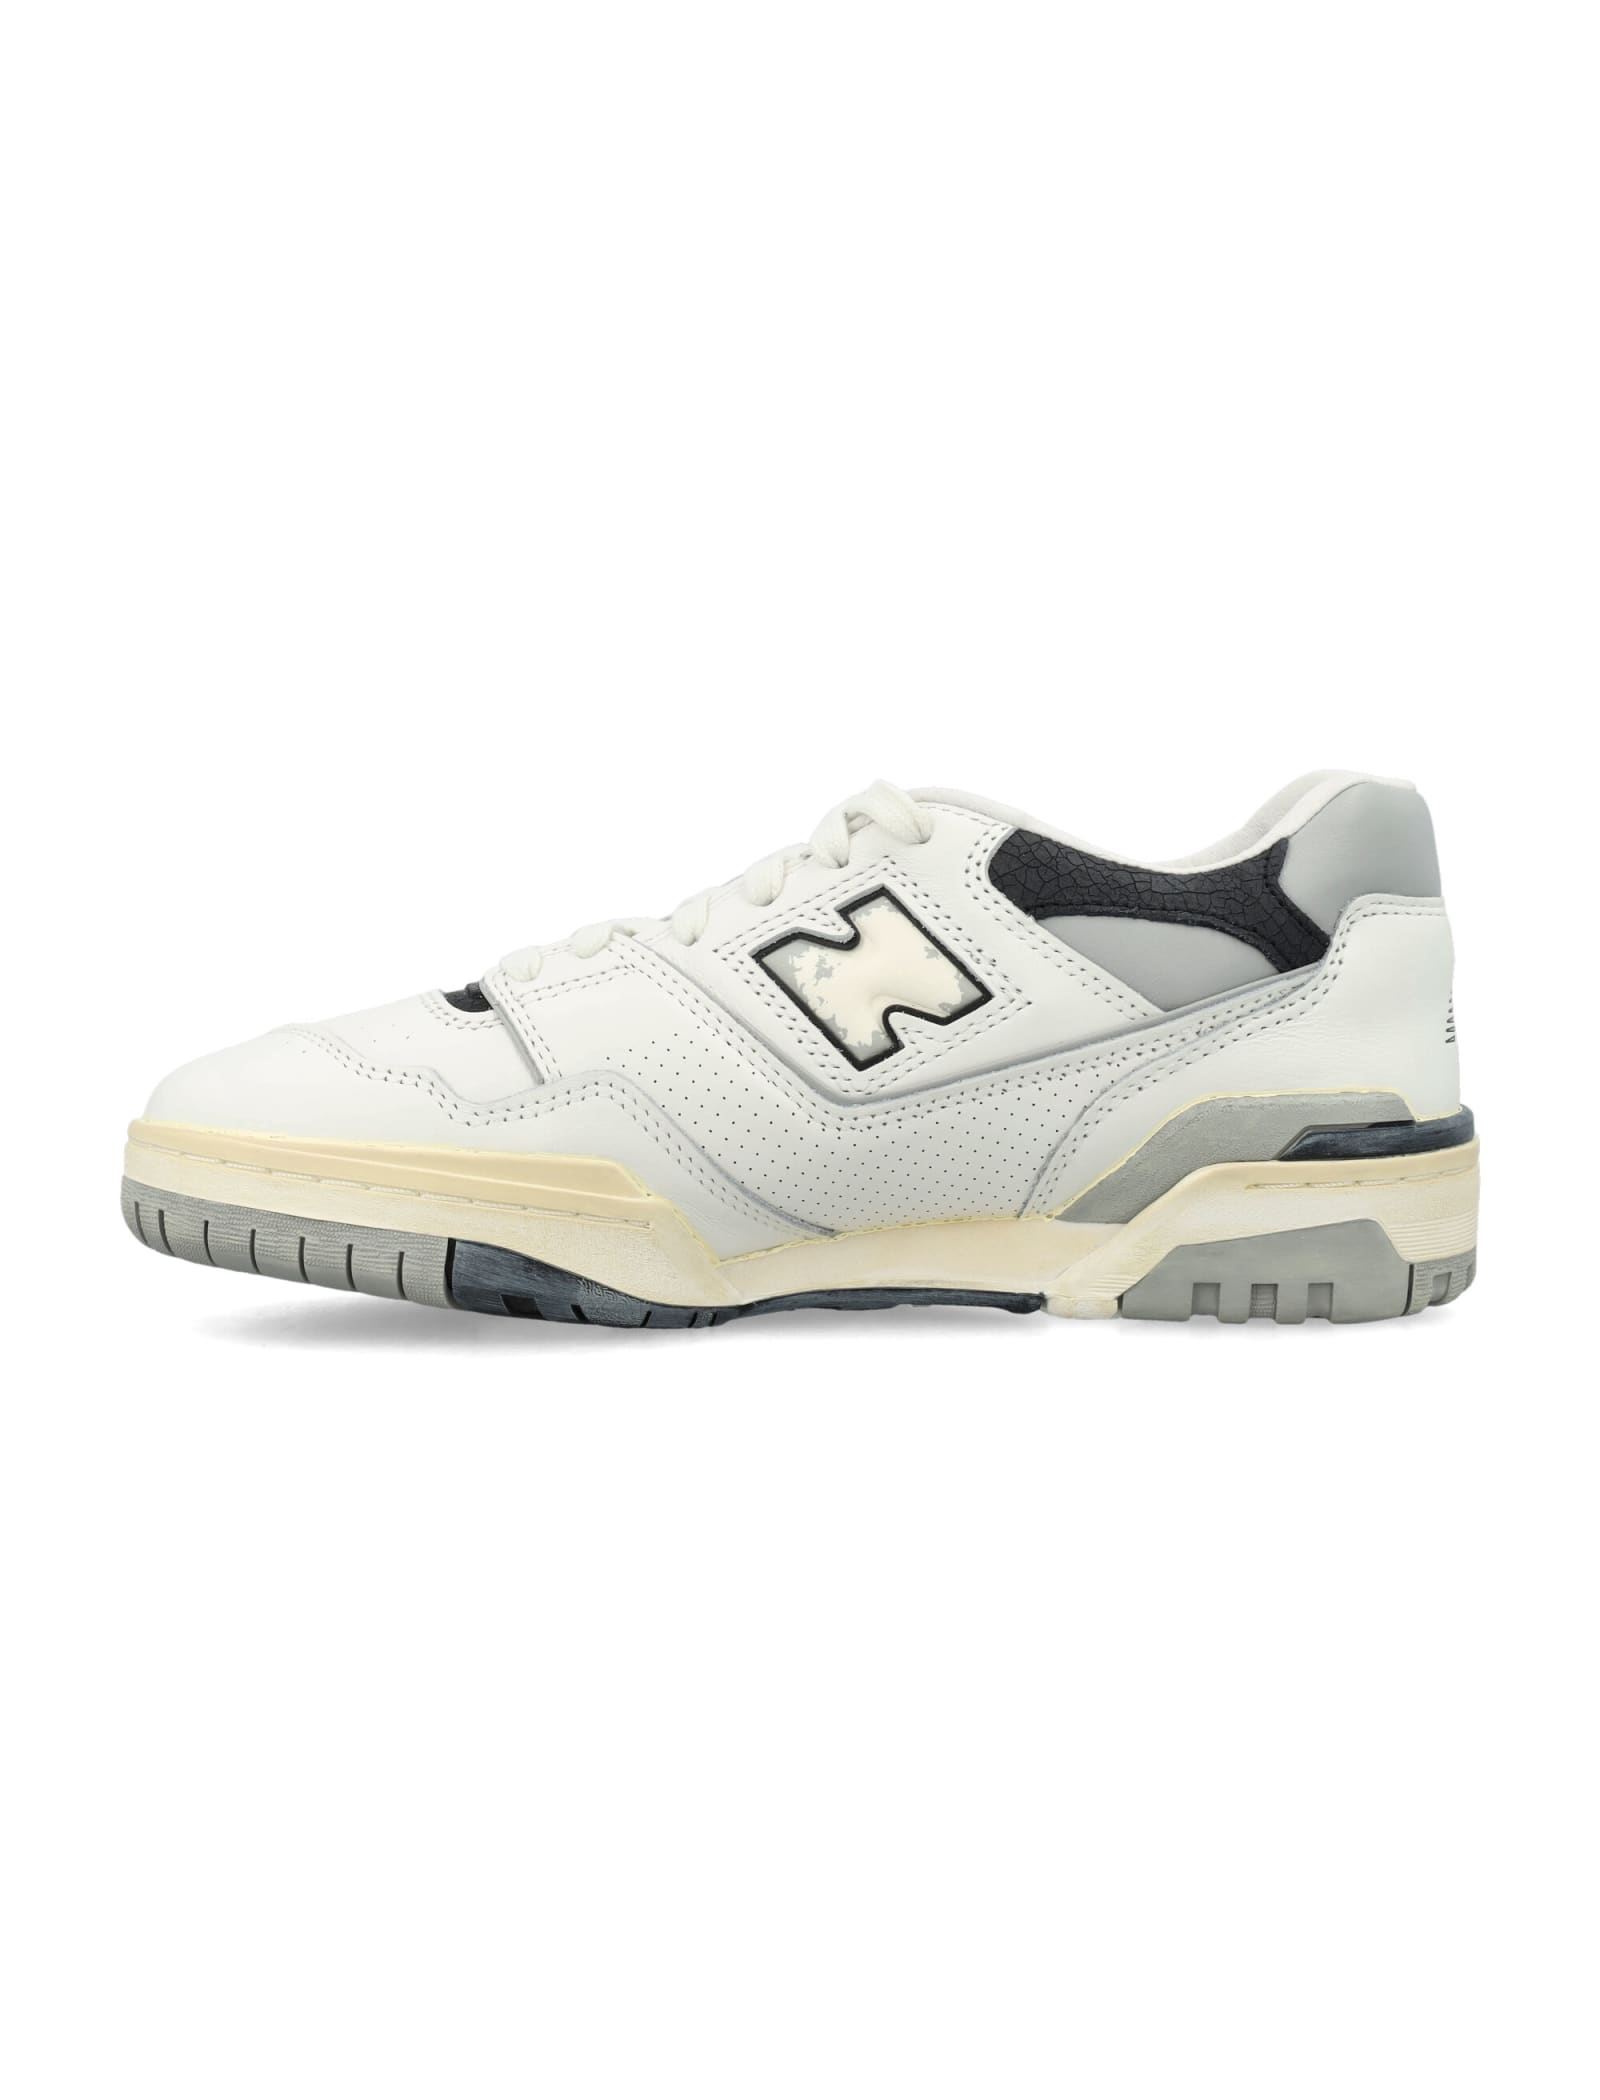 Shop New Balance 550 Sneakers In White Grey